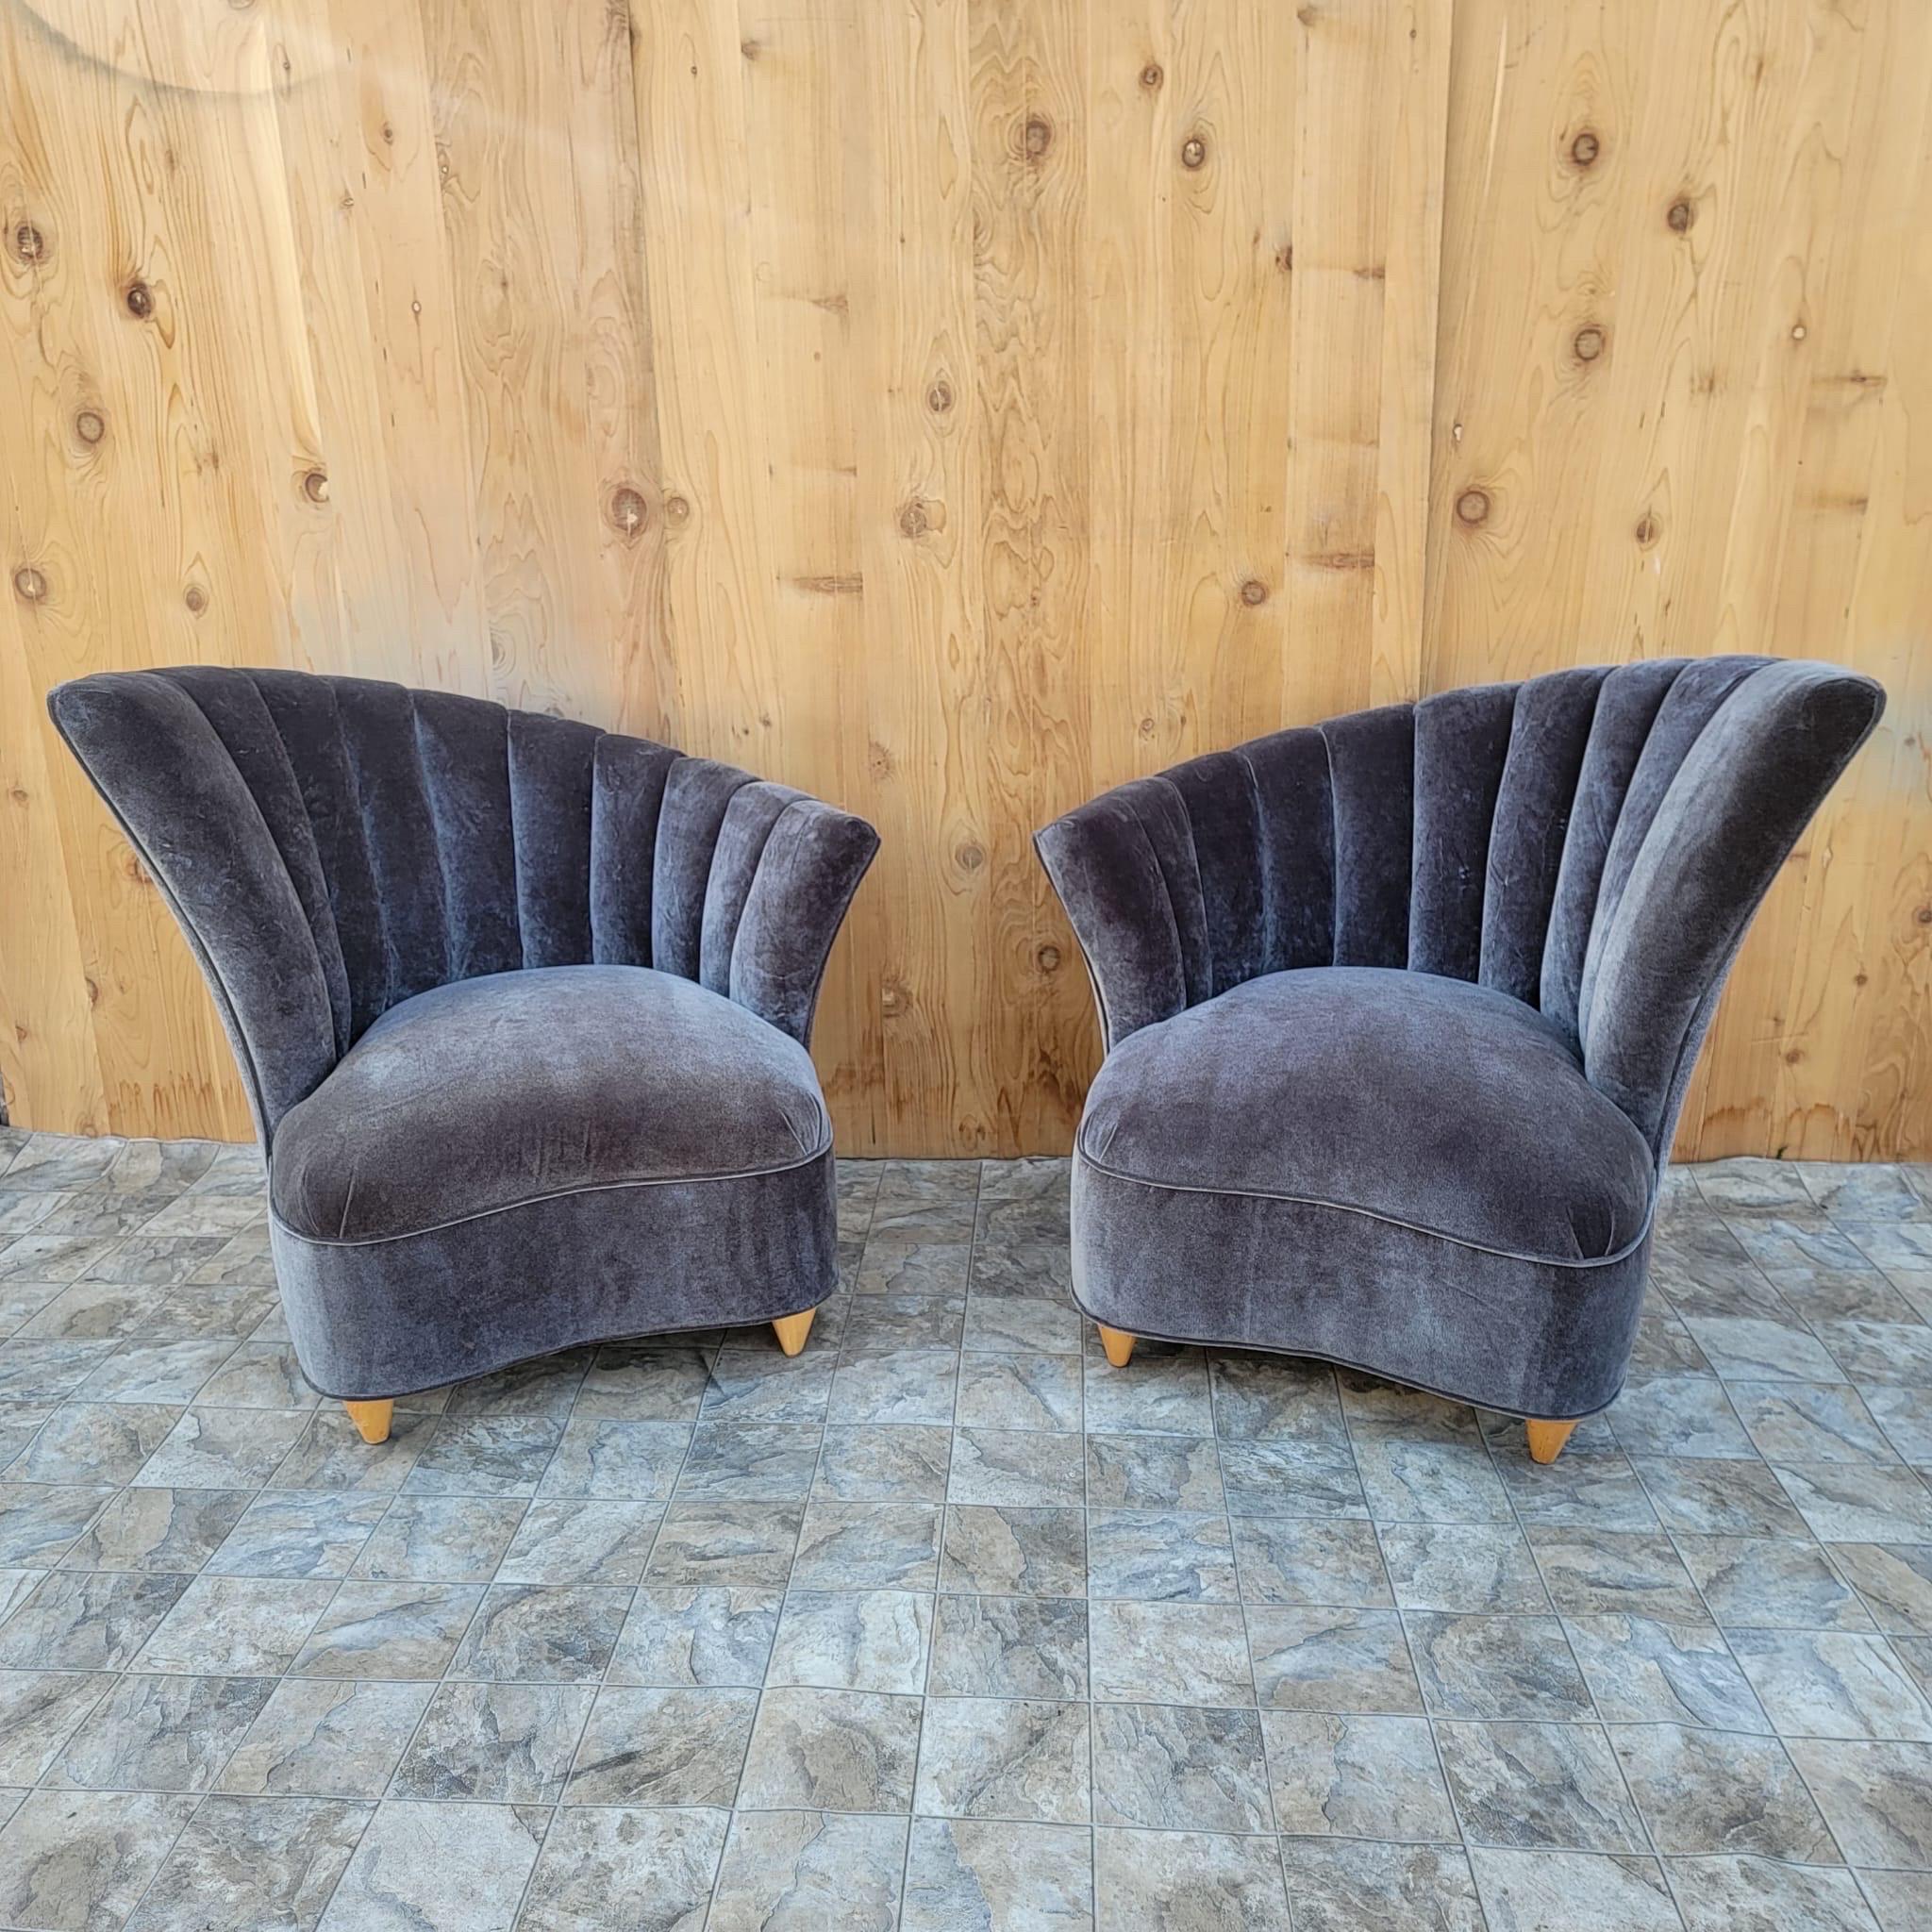 Art Deco Asymmetrical Channel Fan Back Lounge chairs and ottoman Newly Upholstered - 3 Piece Set 

Gorgeous 1940s Set of Art Deco Asymmetrical Fan Channel-Back Lounges with Ottoman. This Set has been Completely Custom Upholstered in a Gorgeous